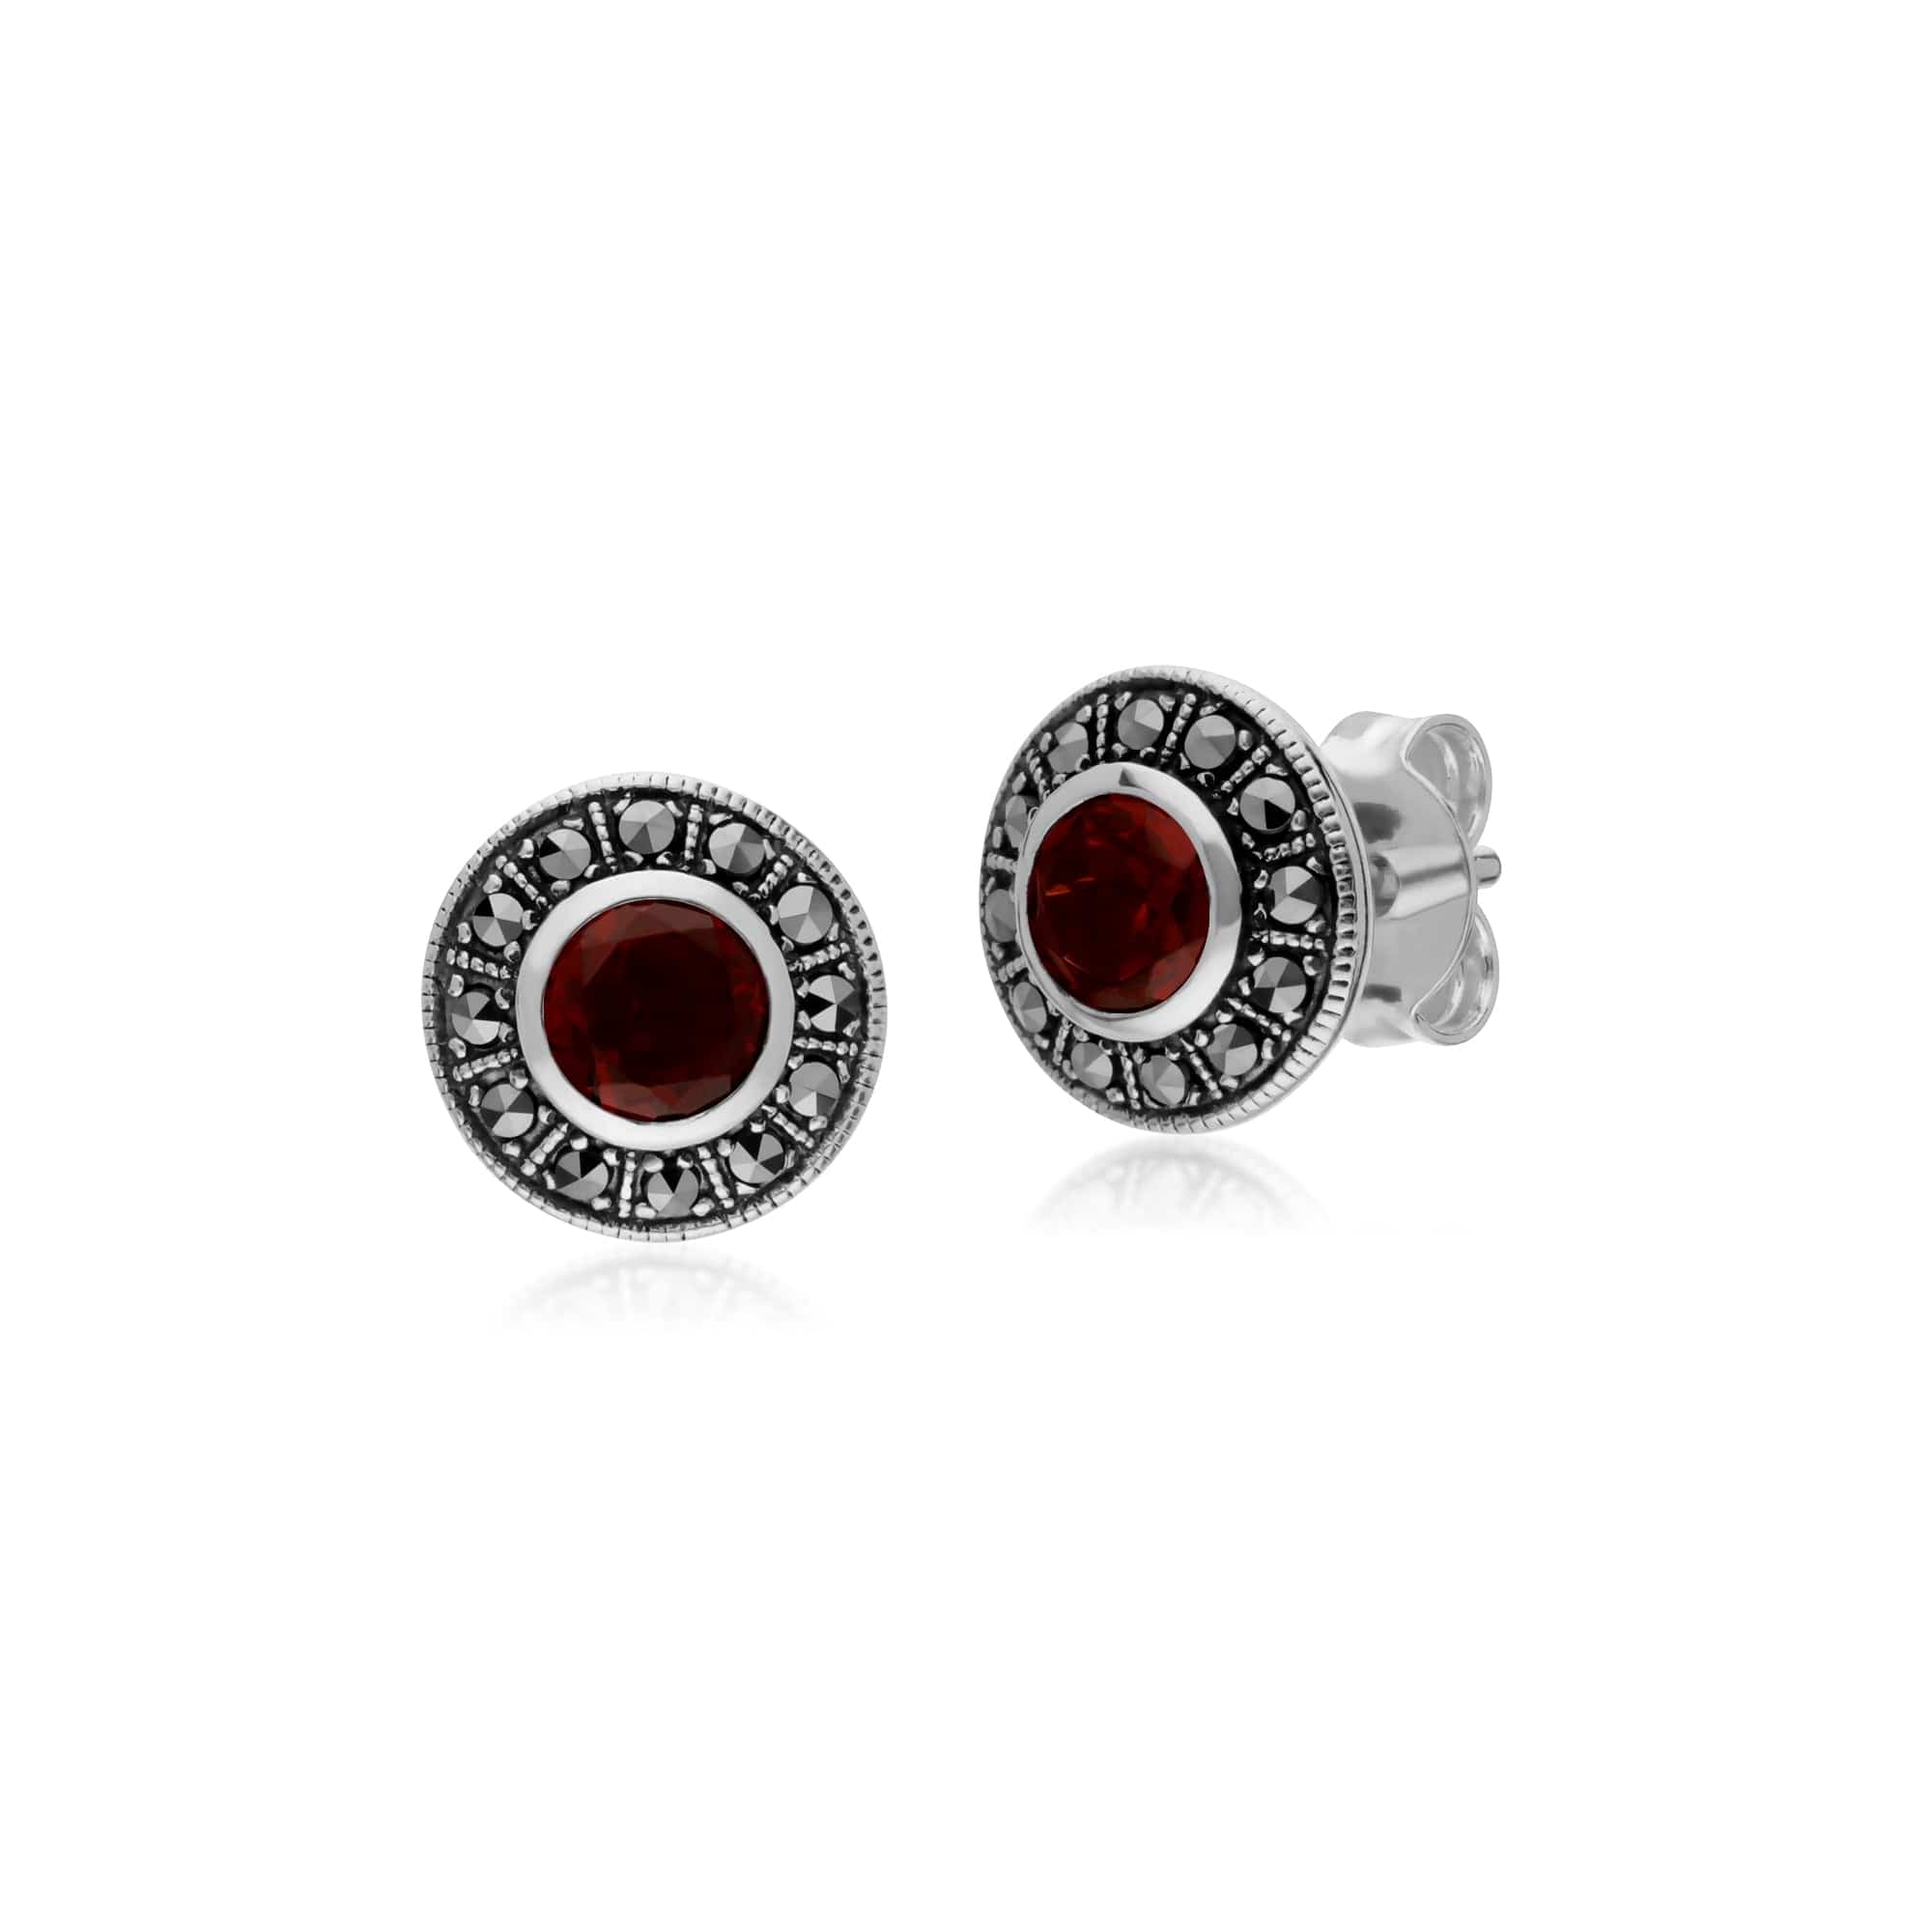 214E872703925-214N707303925 Art Deco Style Round Garnet and Marcasite Cluster Stud Earrings & Pendant Set in 925 Sterling Silver 2